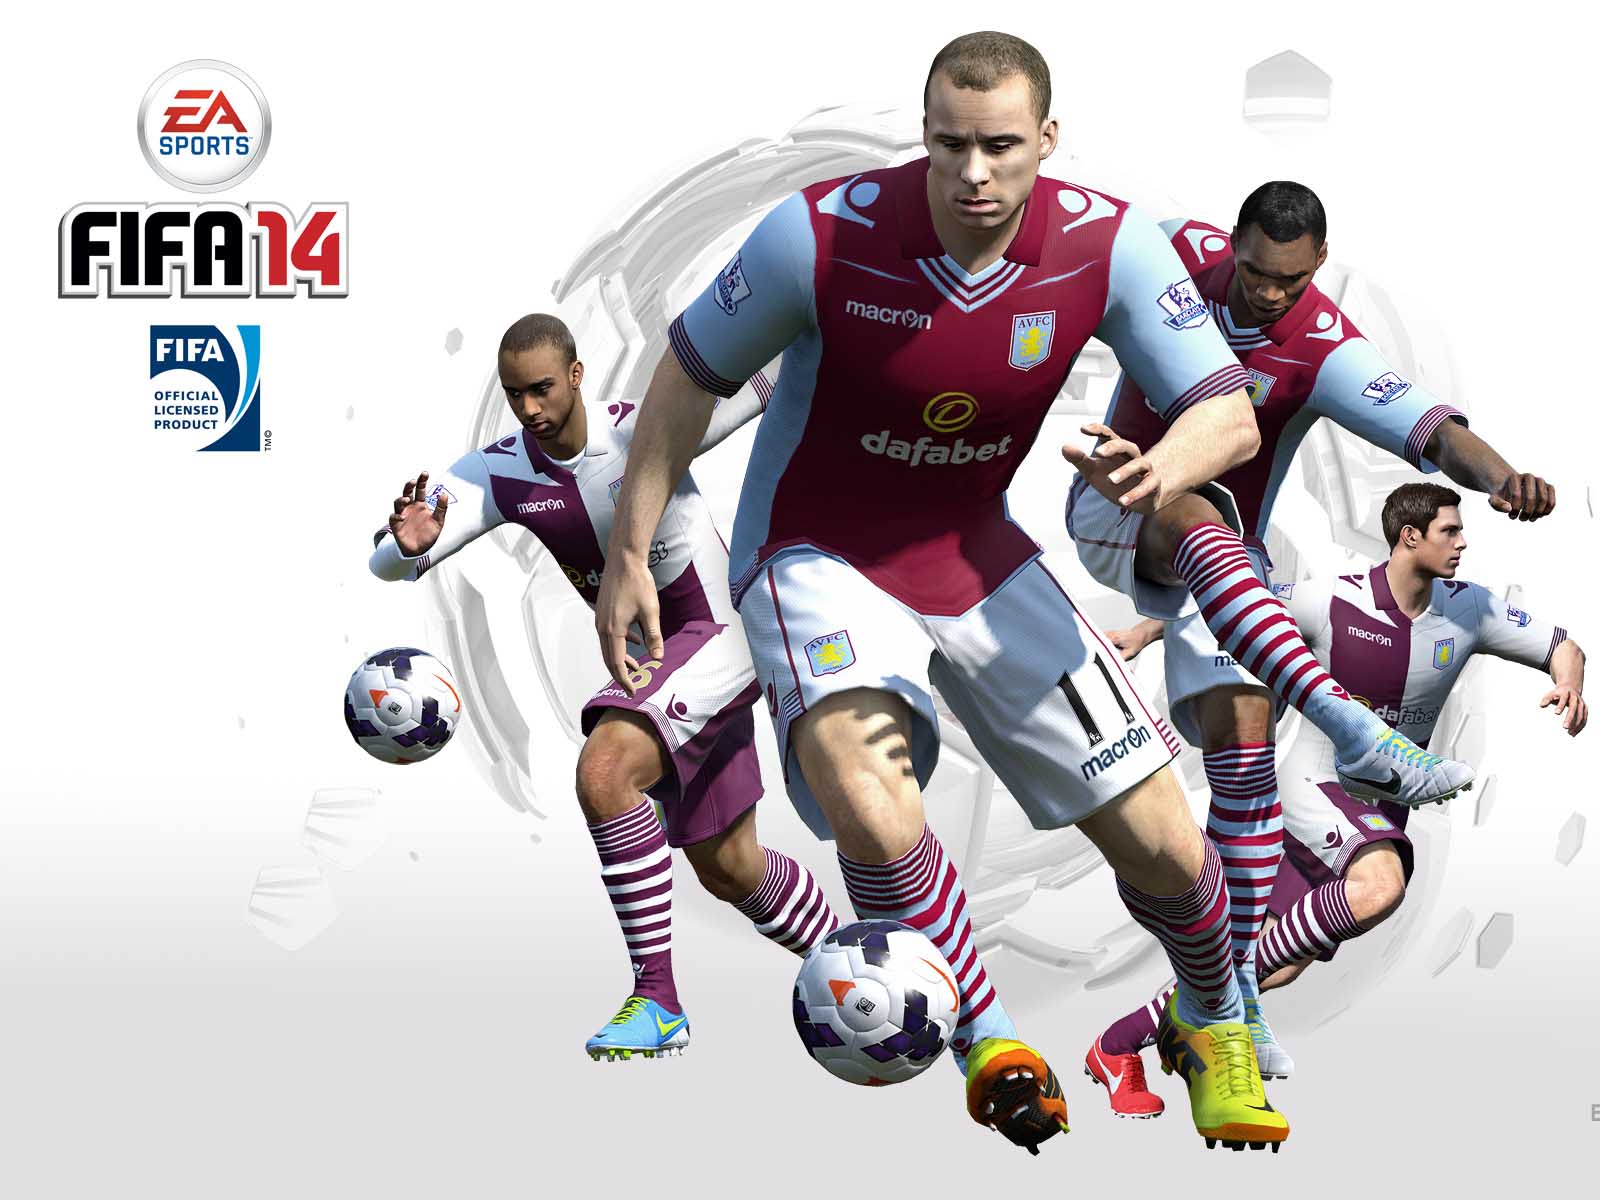 FIFA 14 Wallpaper Official FIFA 14 Wallpaper in a Single Place